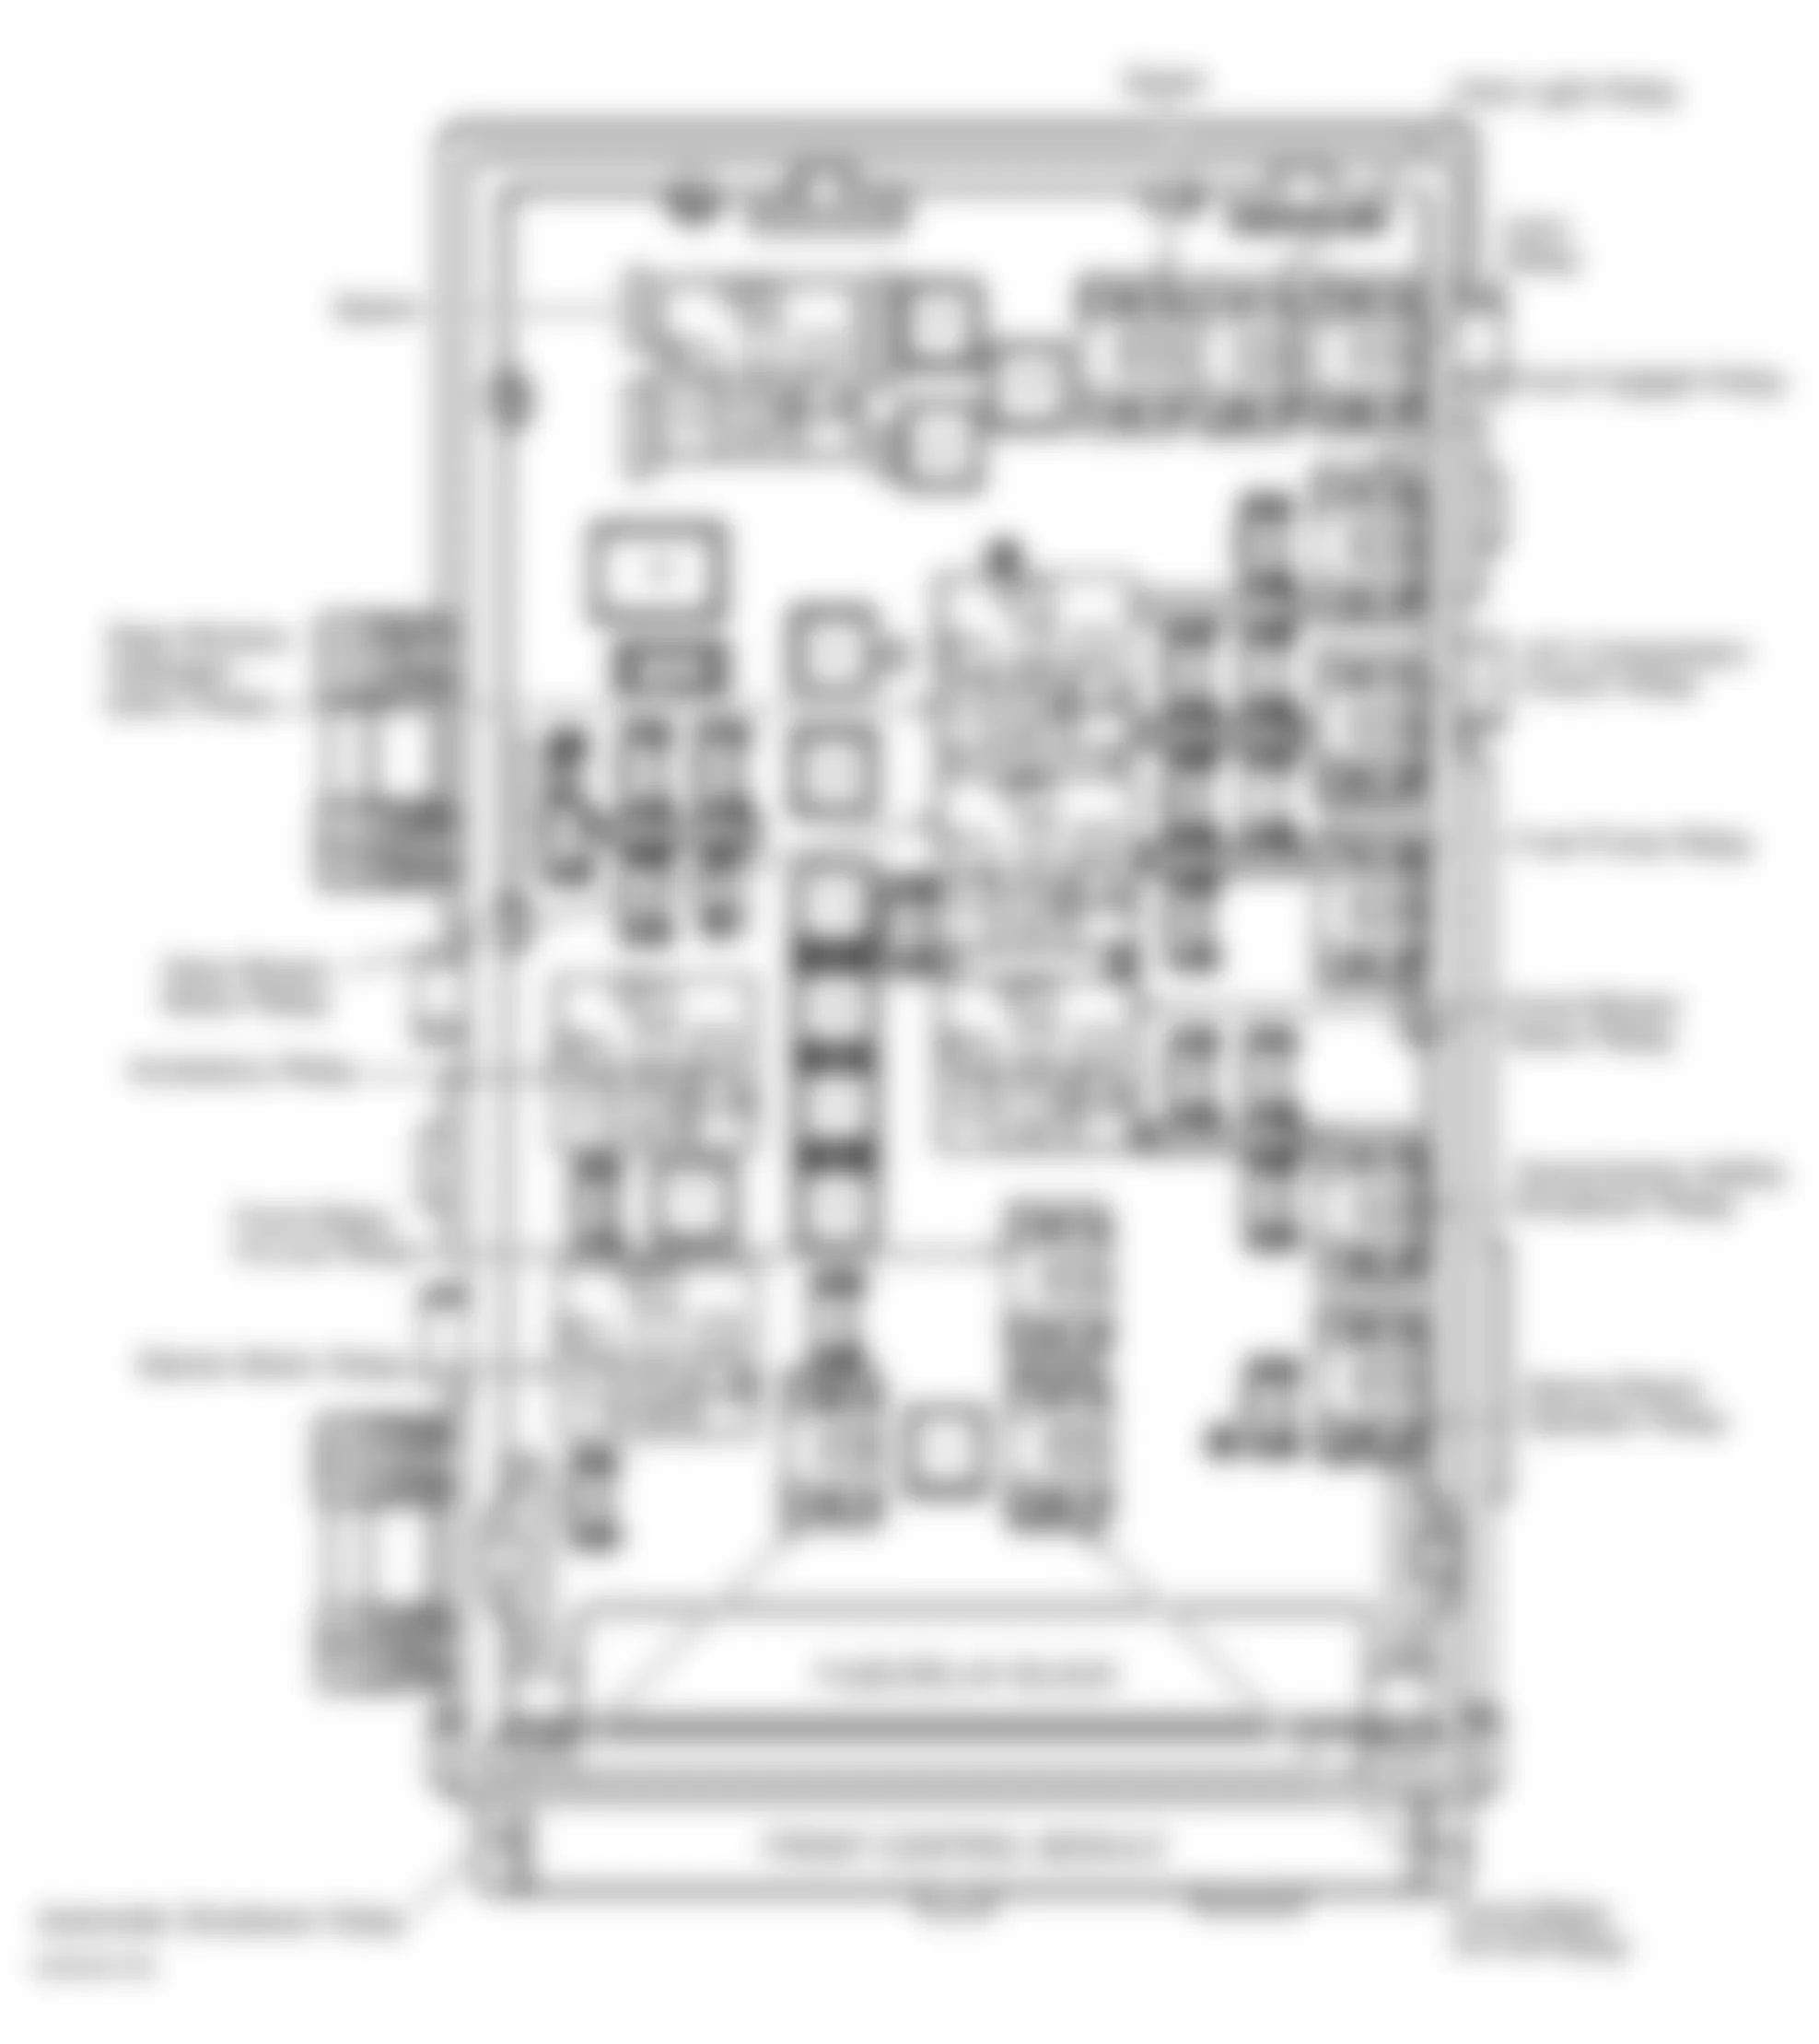 Chrysler Town & Country EX 2001 - Component Locations -  Identifying Fuse & Relay Center (1 Of 2)